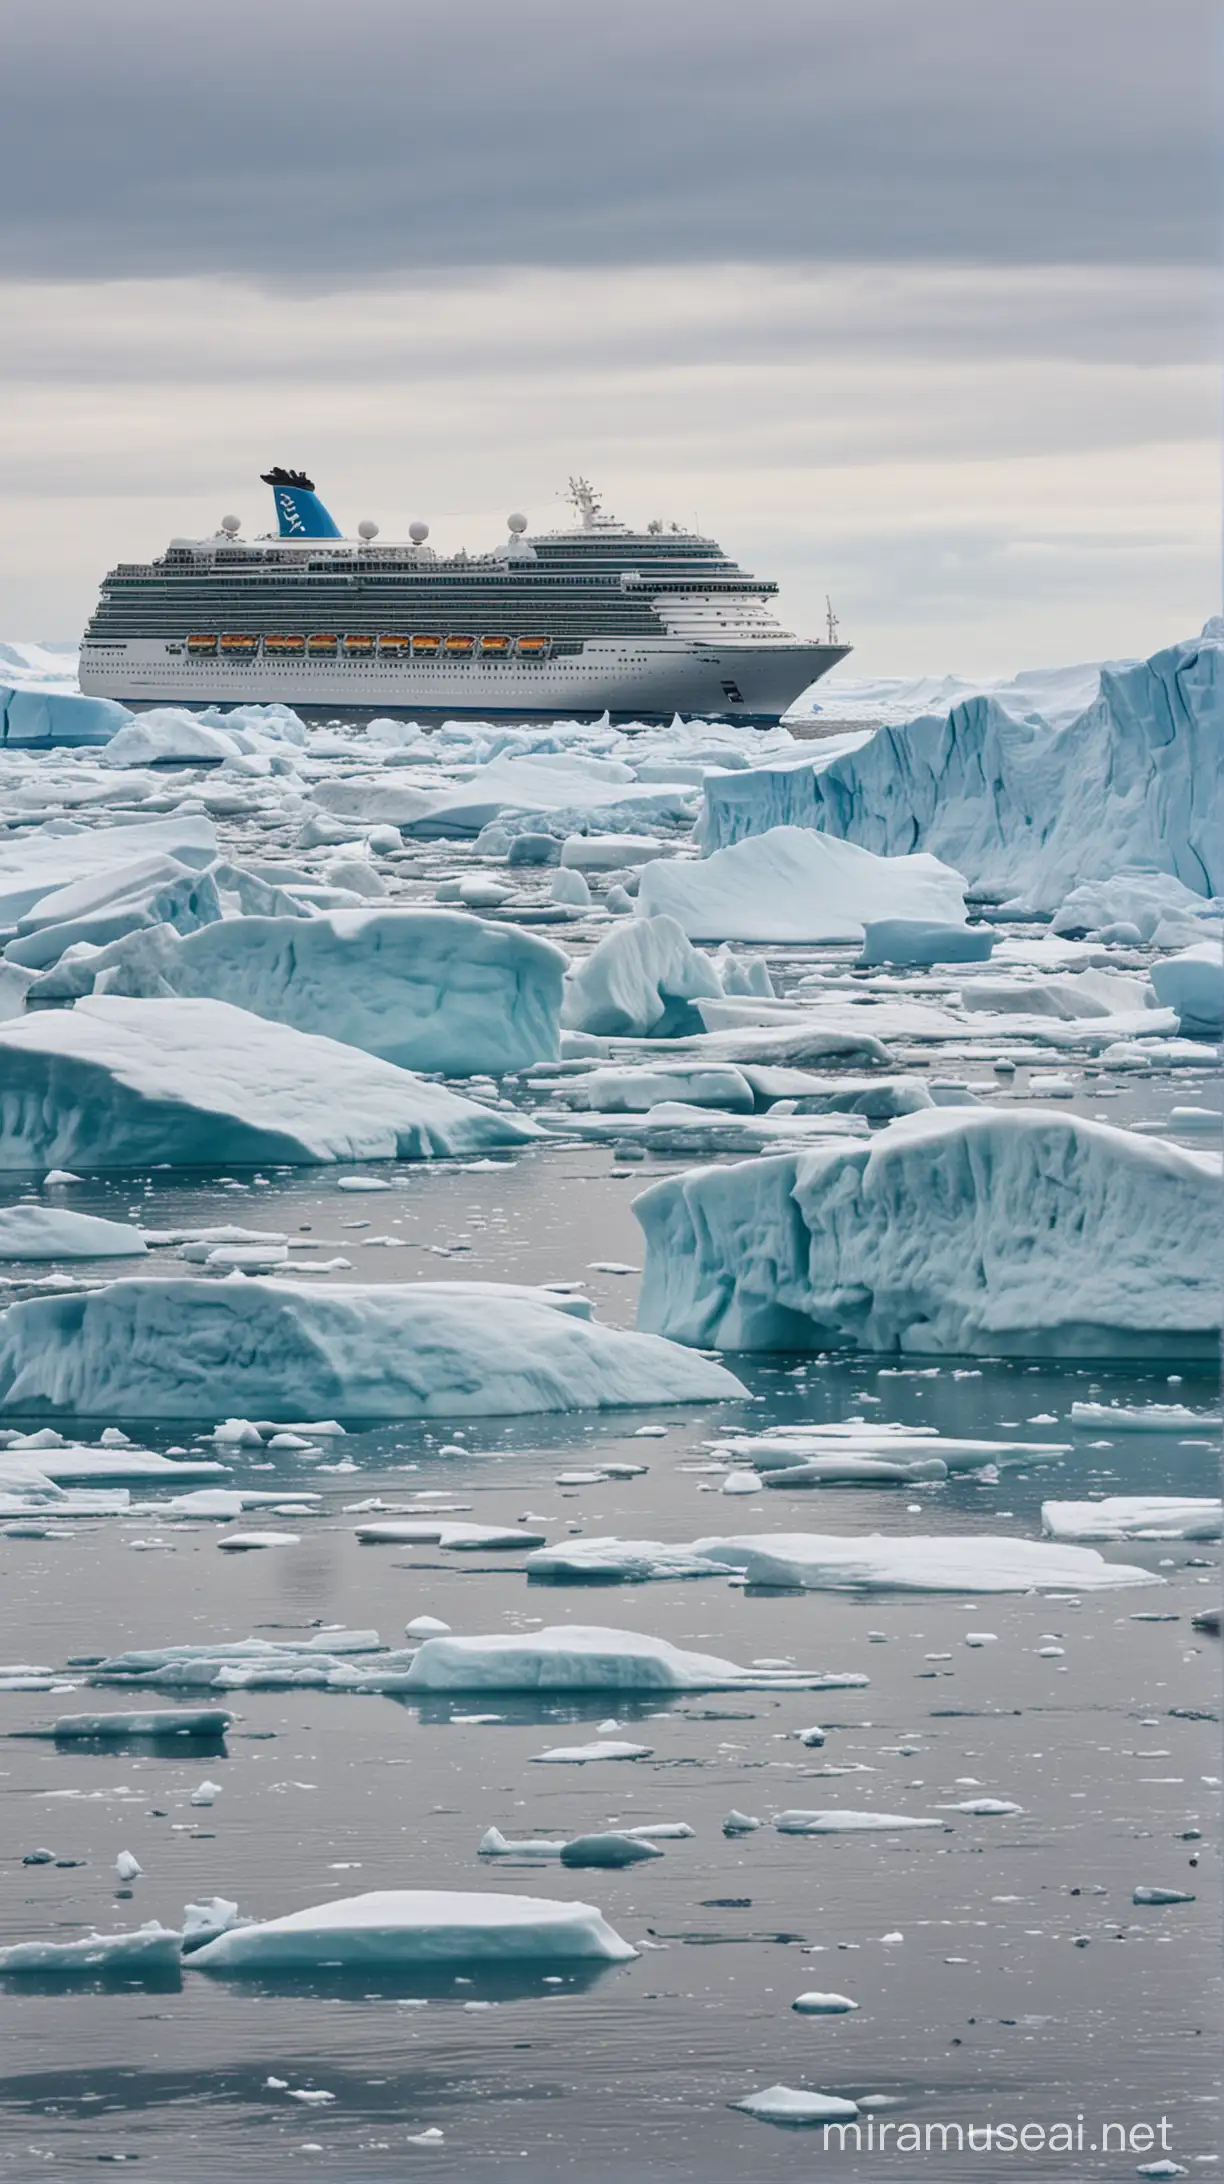 Cruise Ship Sails Past Icebergs While Confronting a Monstrous Ice Creature